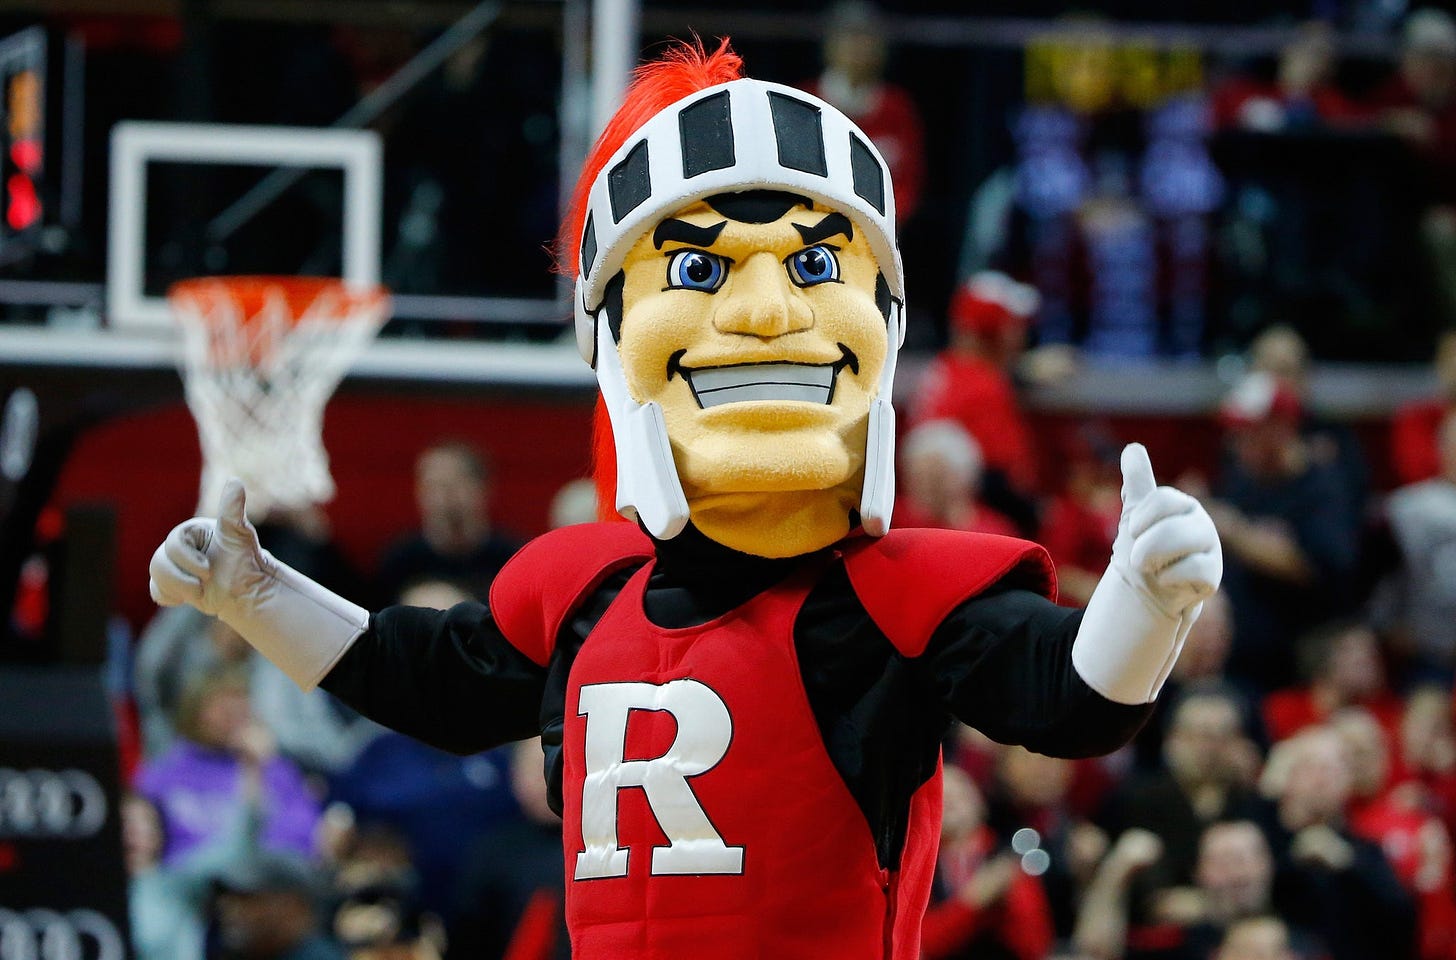 Rutgers student starts petition demanding end to push for ethnically  diverse mascots - nj.com